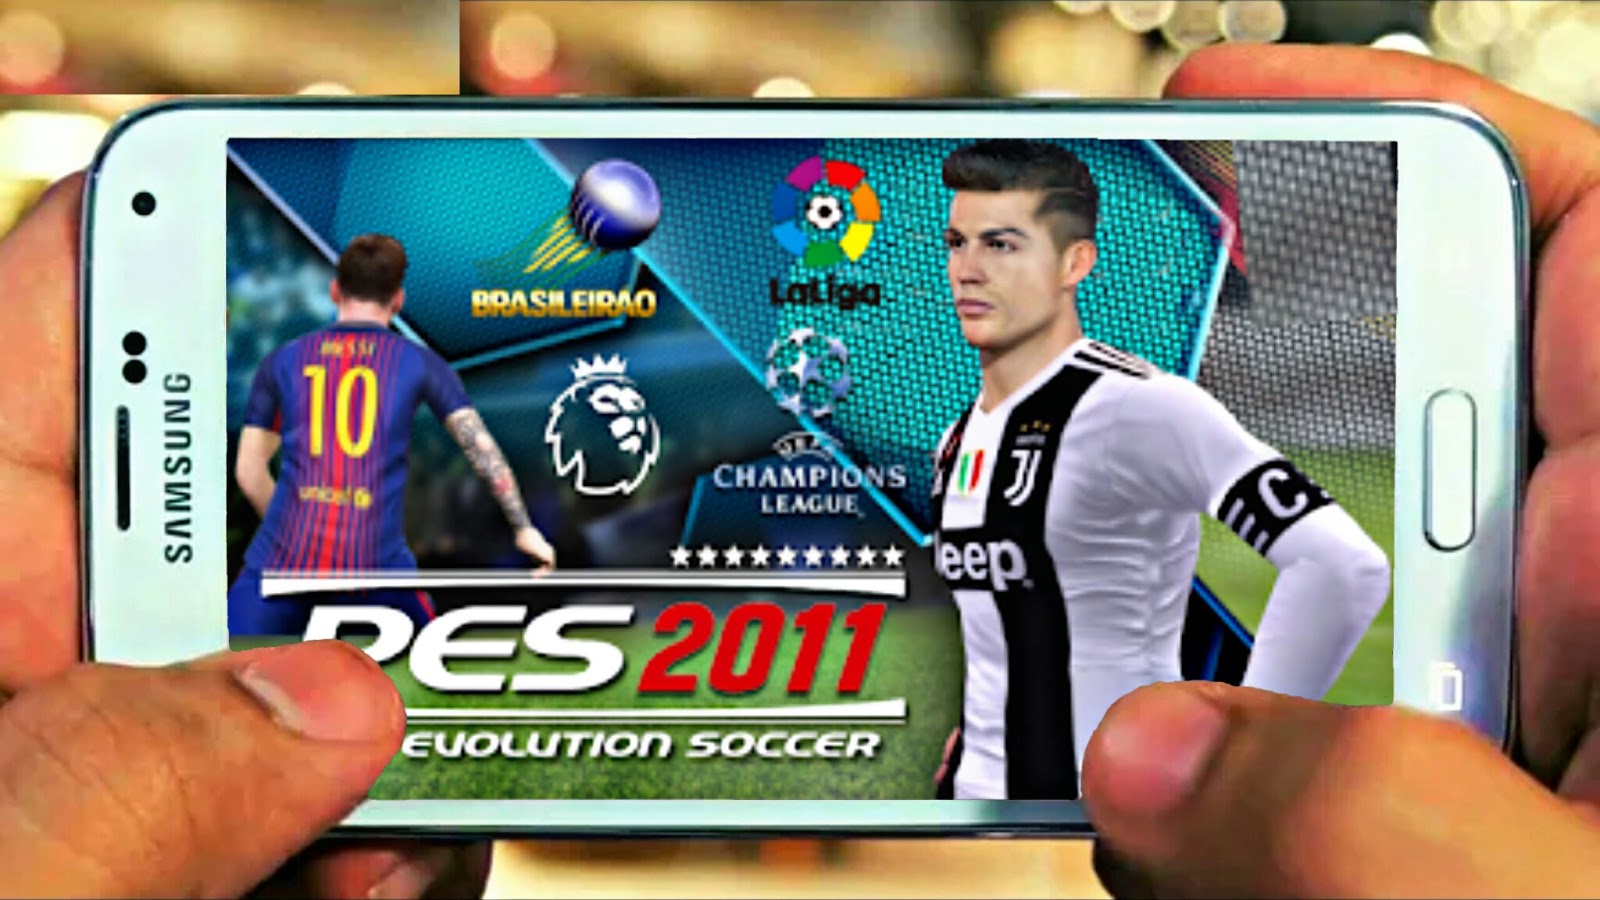 PES 2011 Apk Mod PES 2019 download Android 50 MB, Androgado